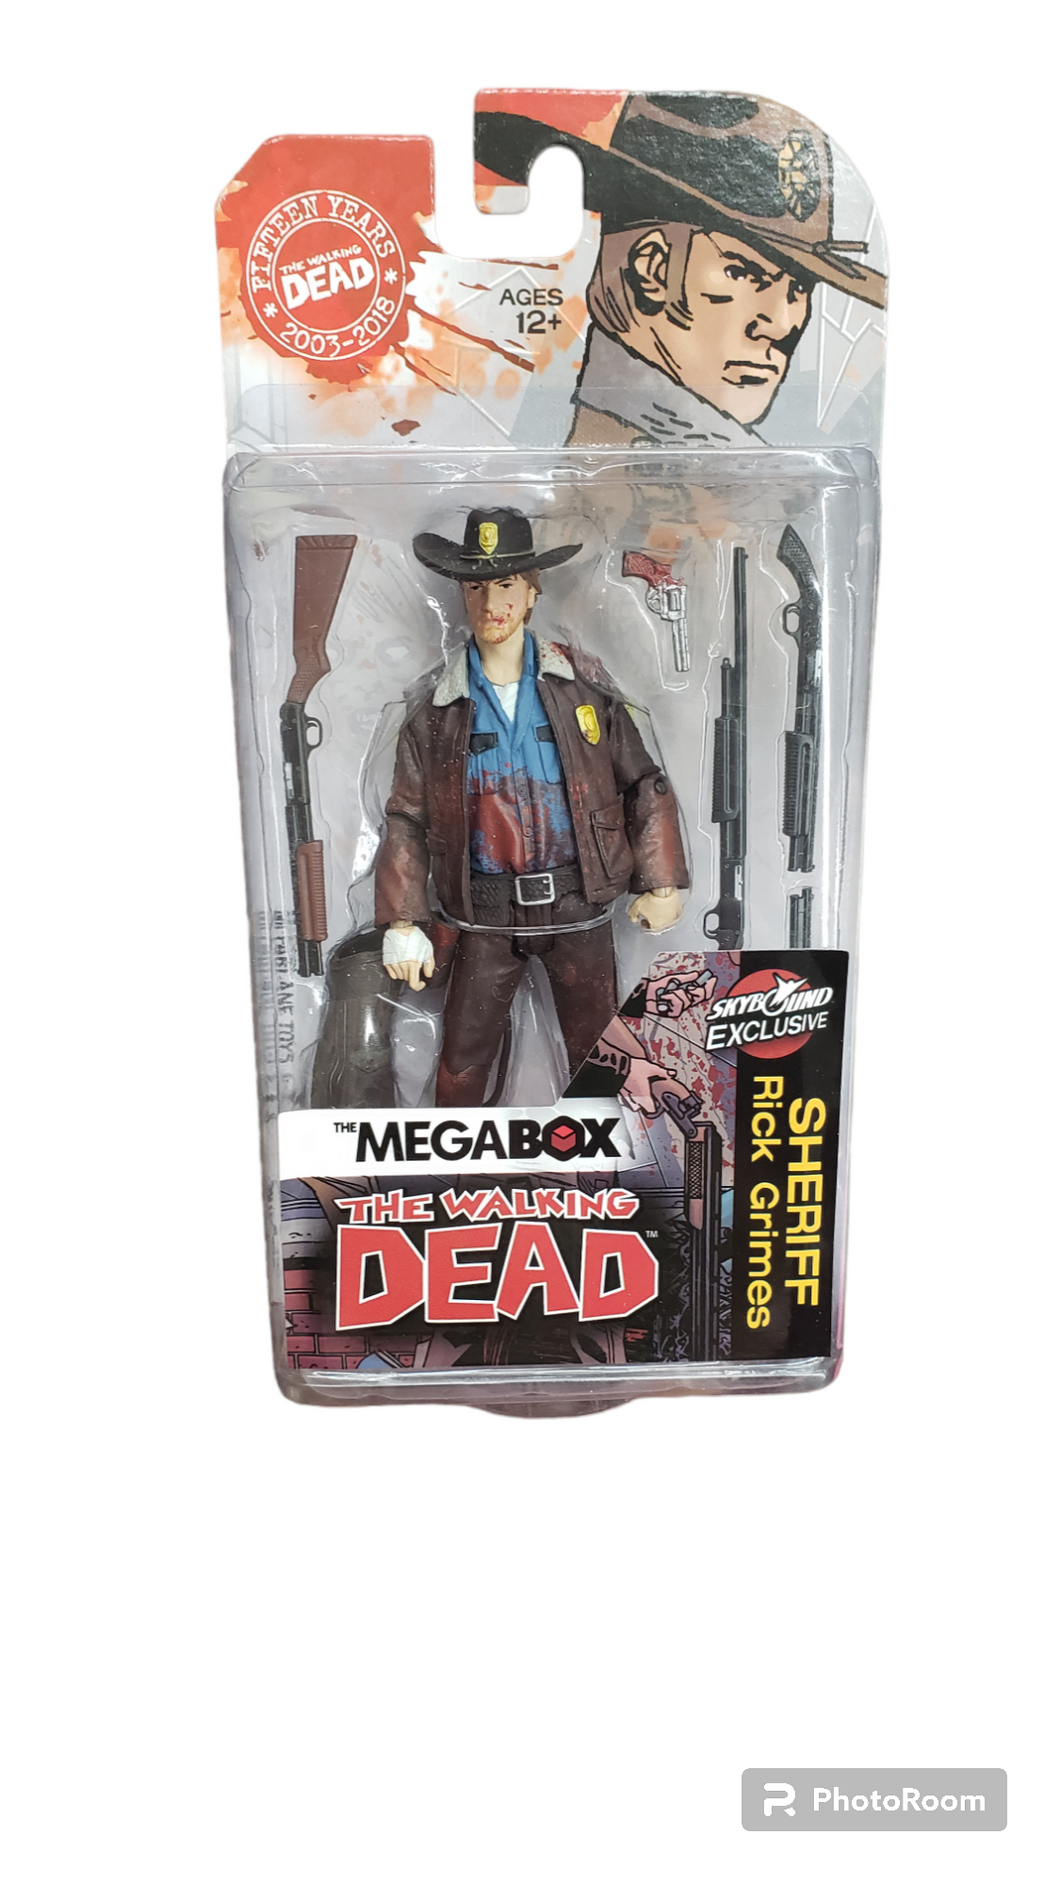 2018 Skybound The Megabox Walking Dead Bloody Sheriff Rick Grimes Action Figure